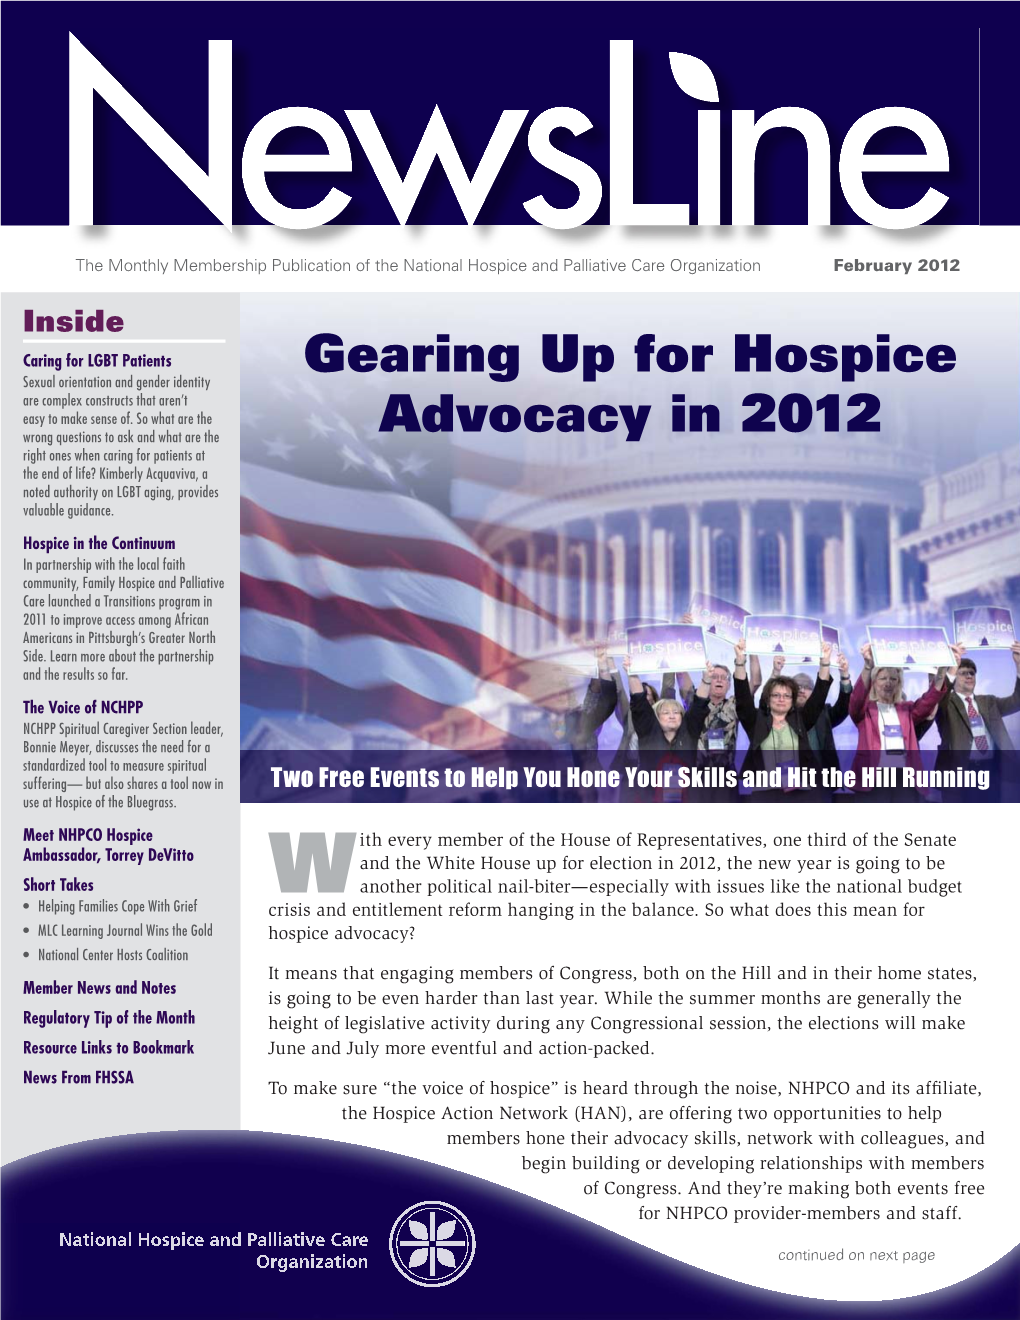 Gearing up for Hospice Advocacy in 2012